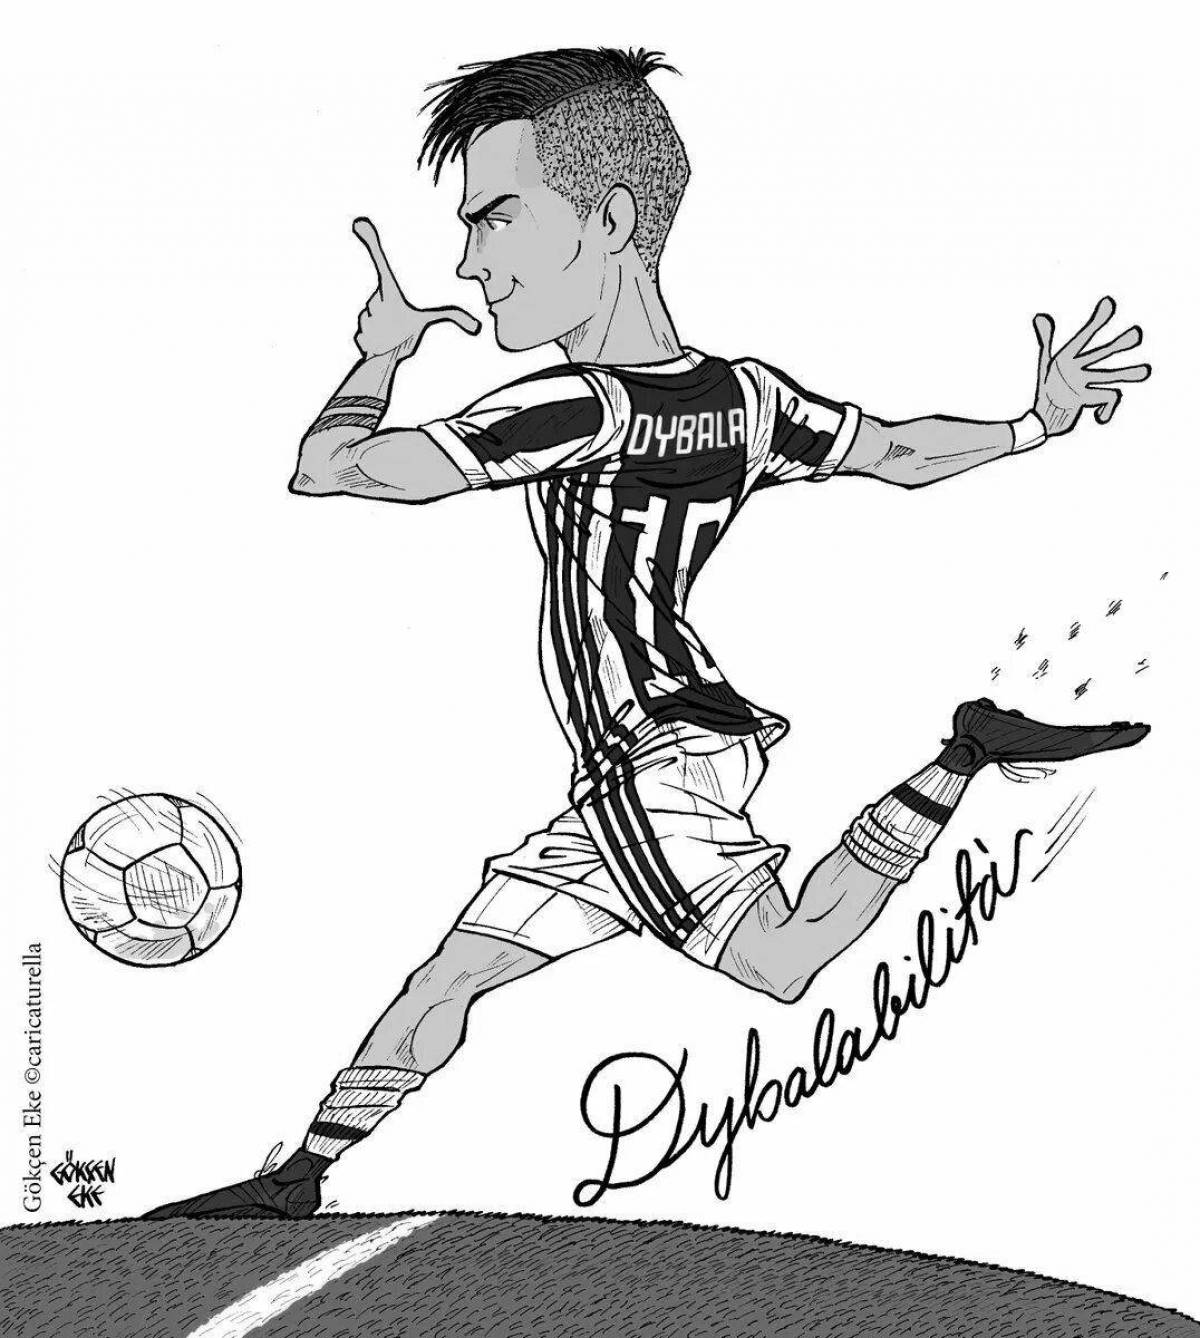 Awesome dybala coloring page